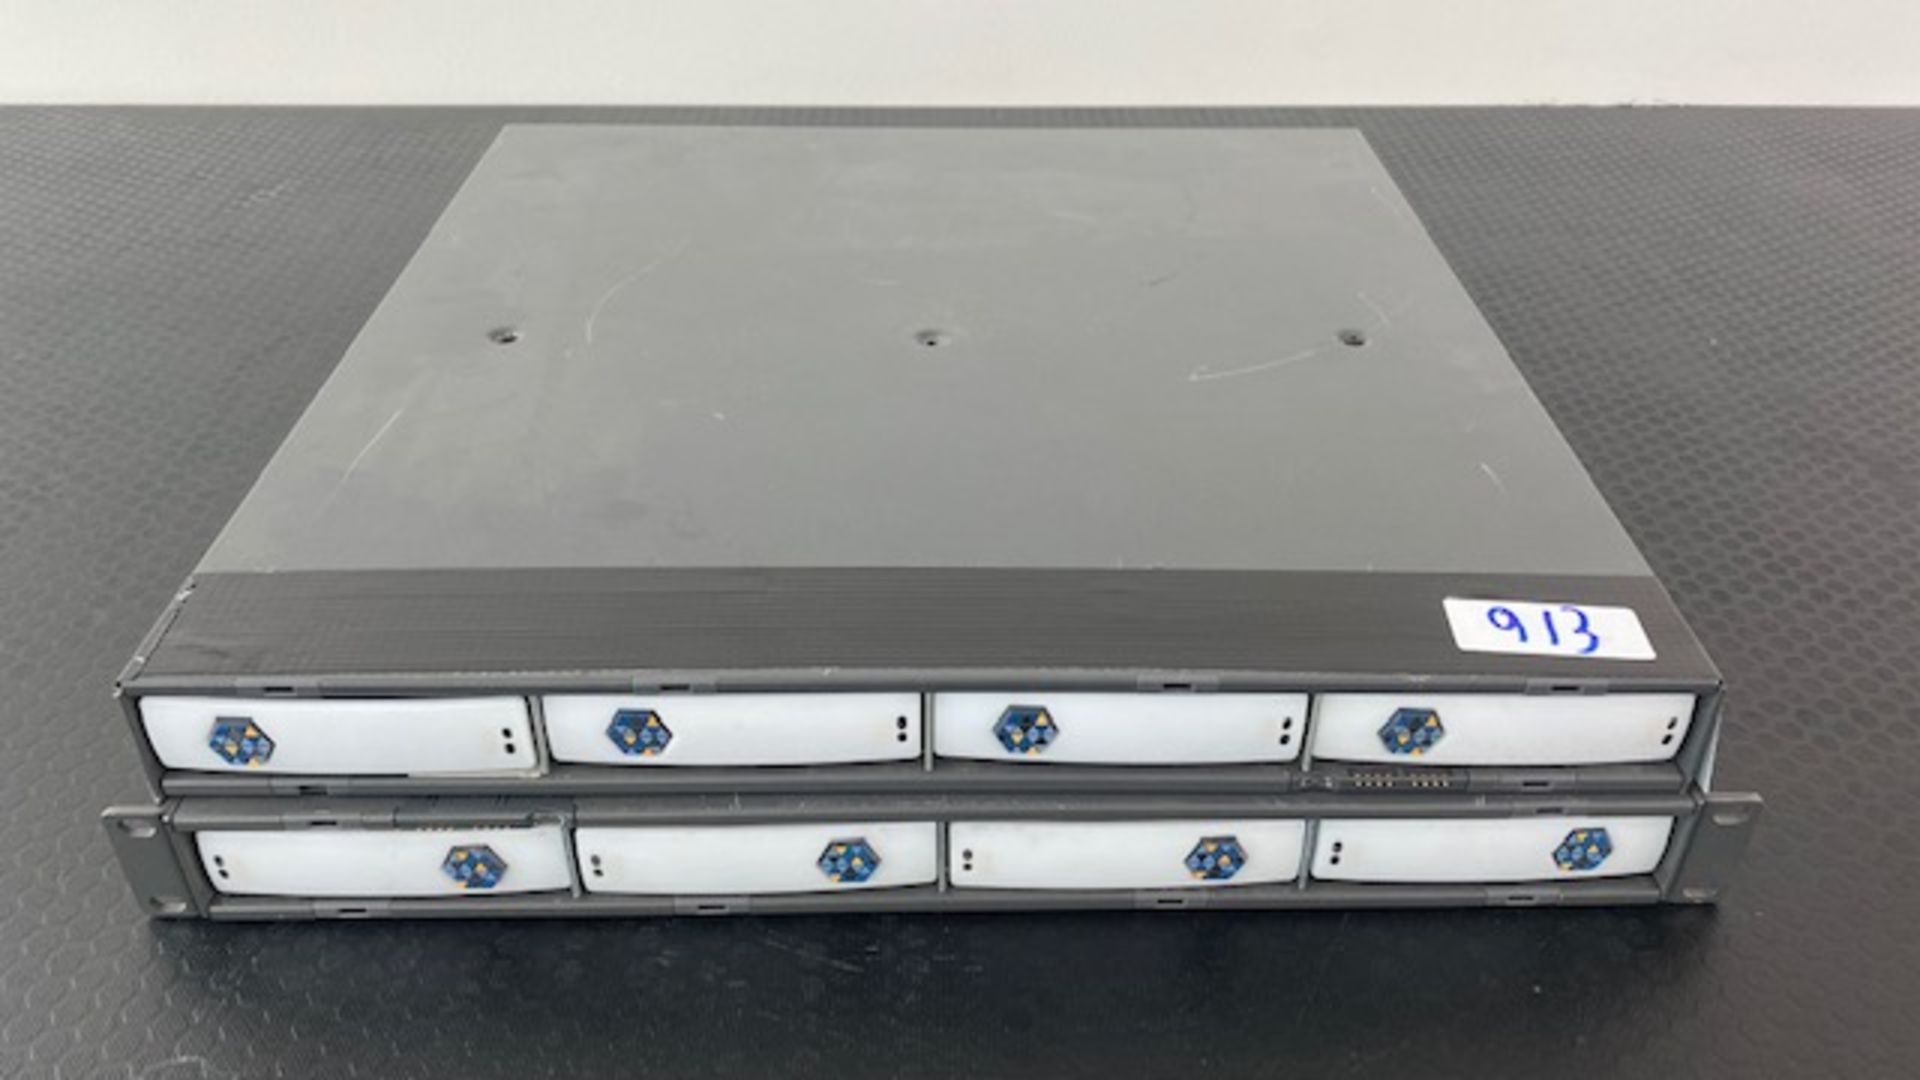 2 x Kaleidescape Kservers 1500 - Ref: 913 - CL581 - Location: Altrincham WA14Items will be available